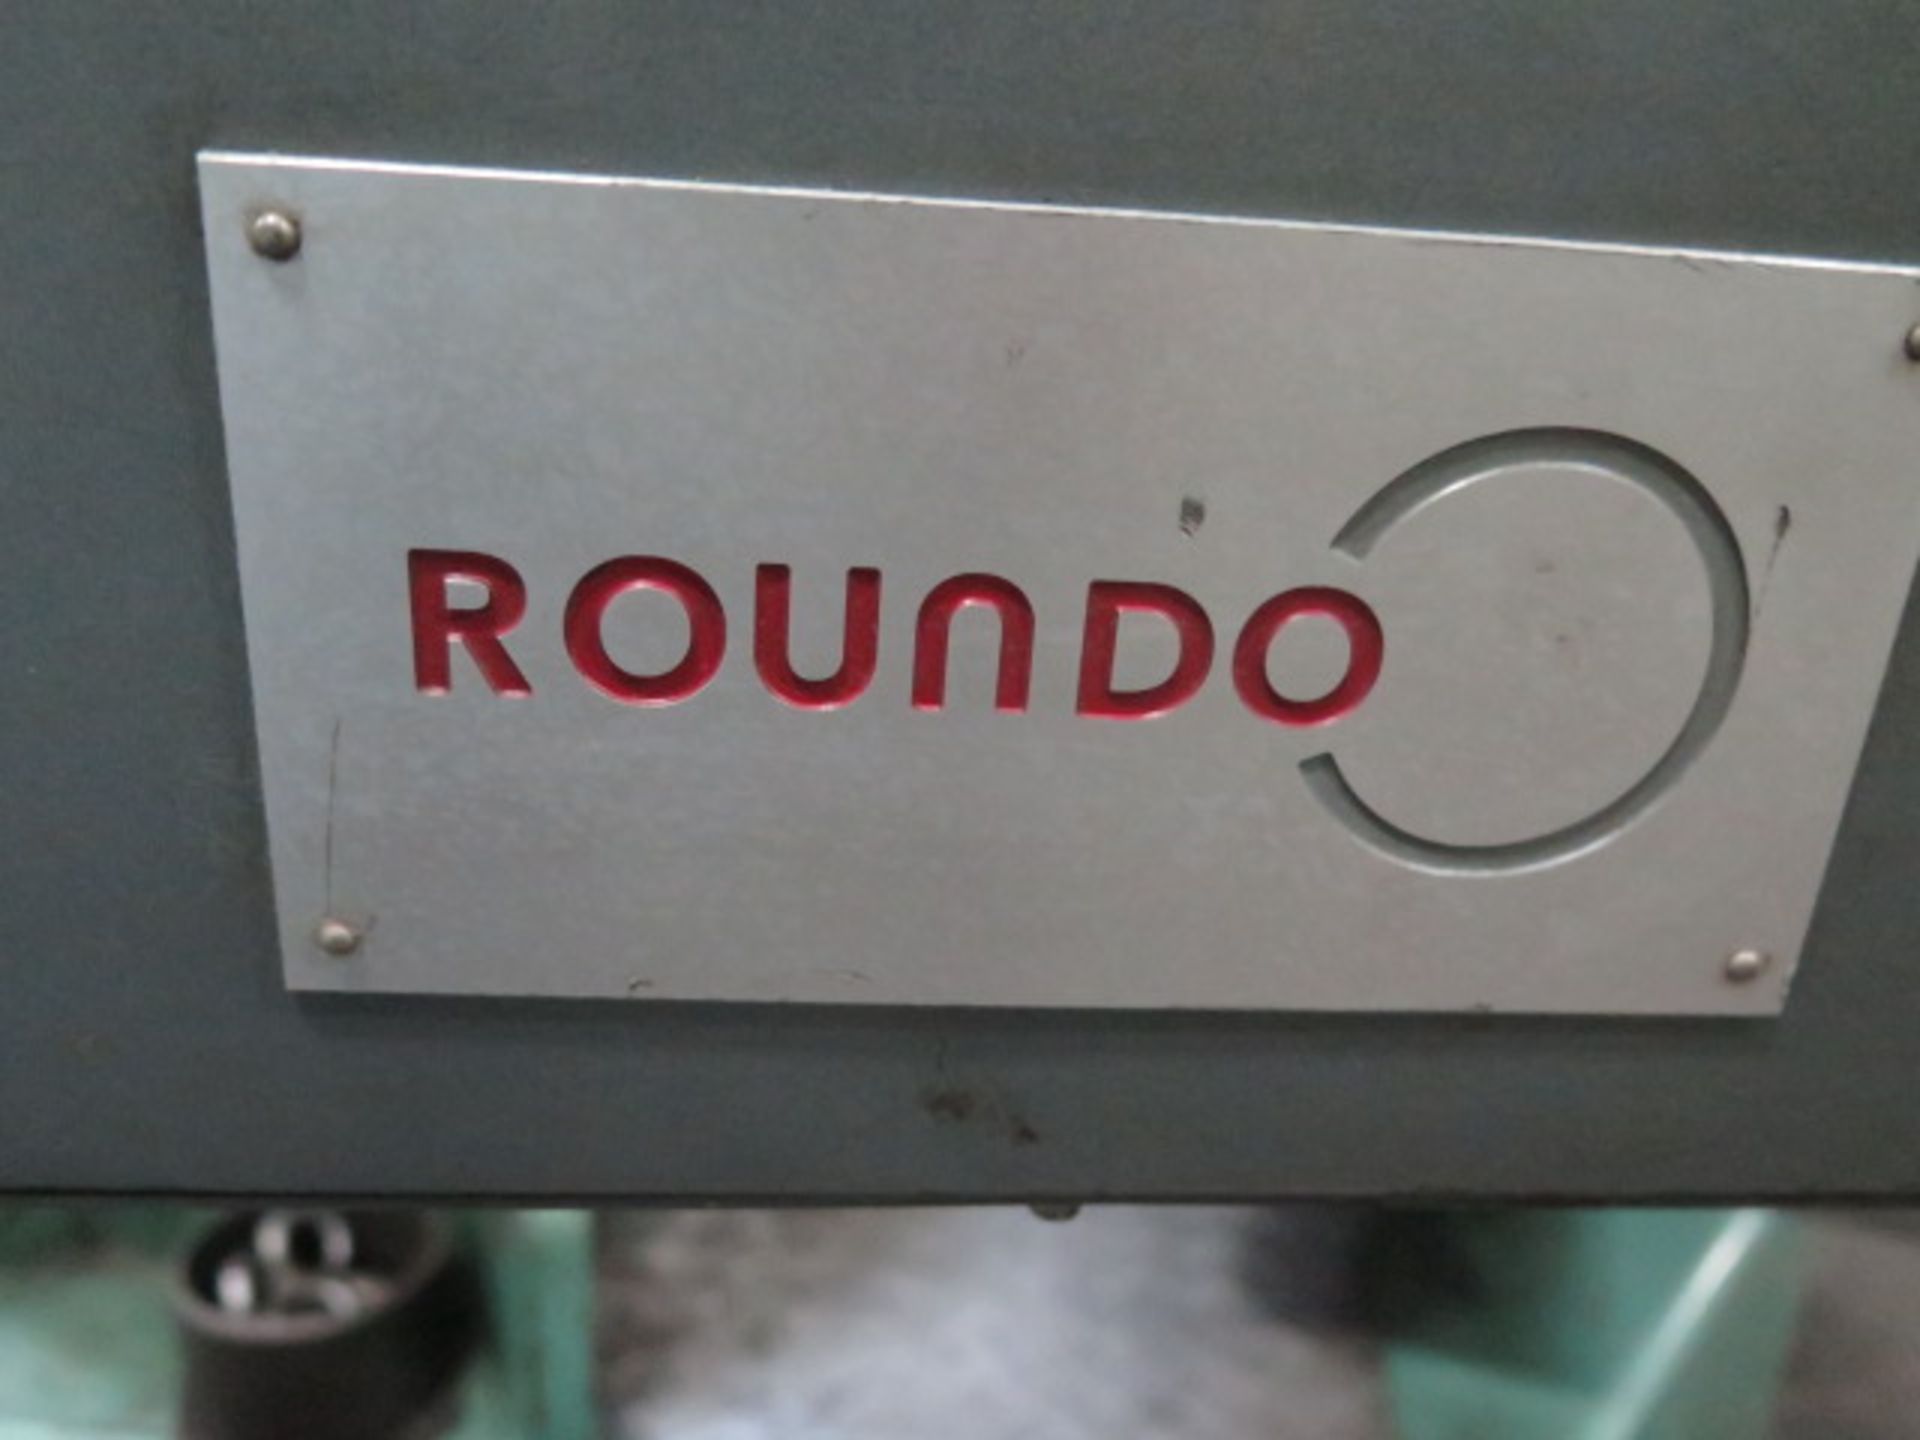 2003 Roundo Comeq mdl. R-9-S Hydraulic Angle Roll s/n 037527 w/ Roundo Controls, SOLD AS IS - Image 3 of 14